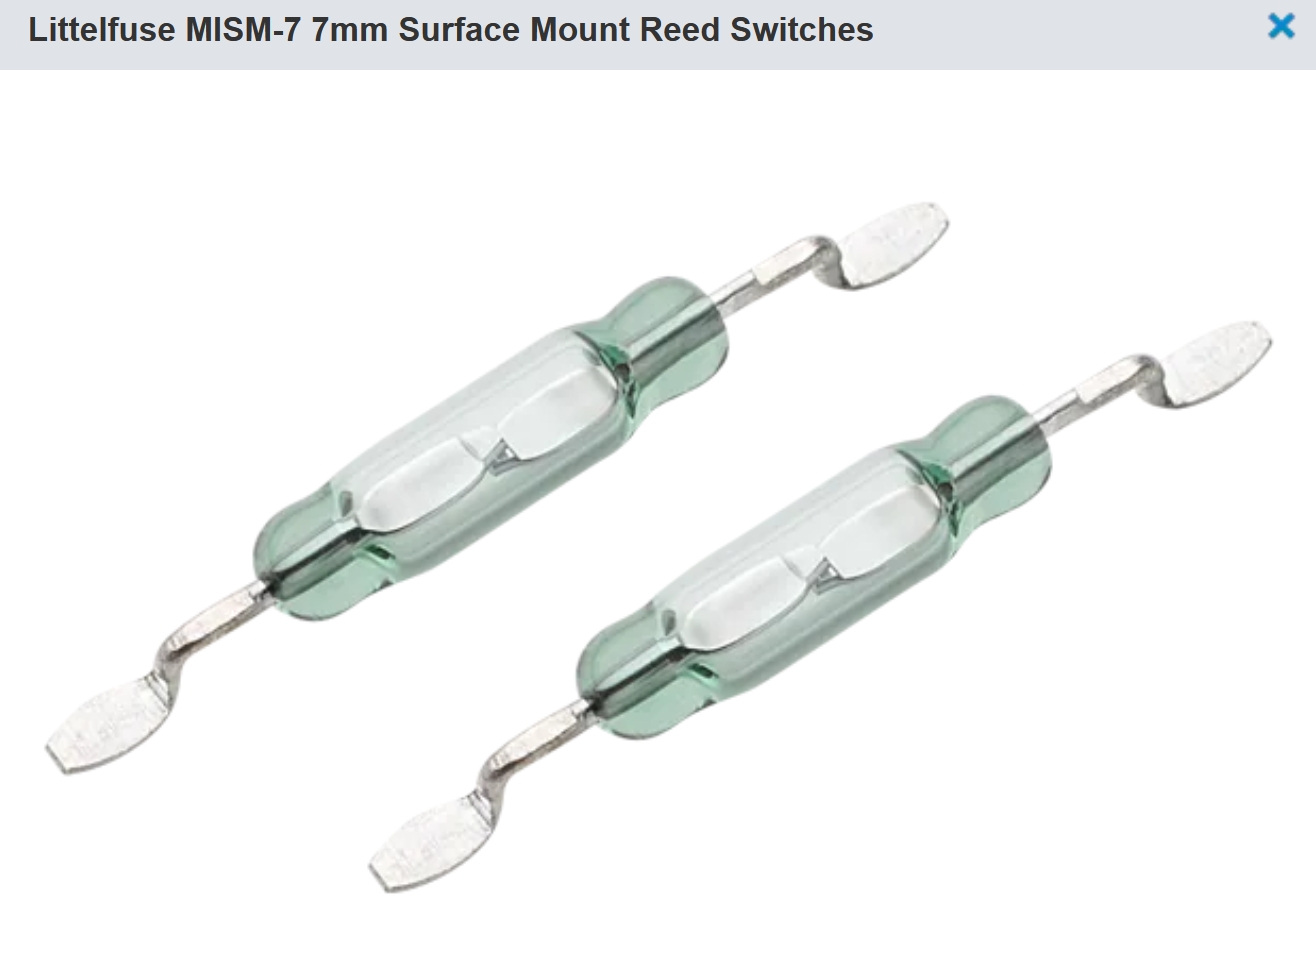 magnetic reed switch.jpg